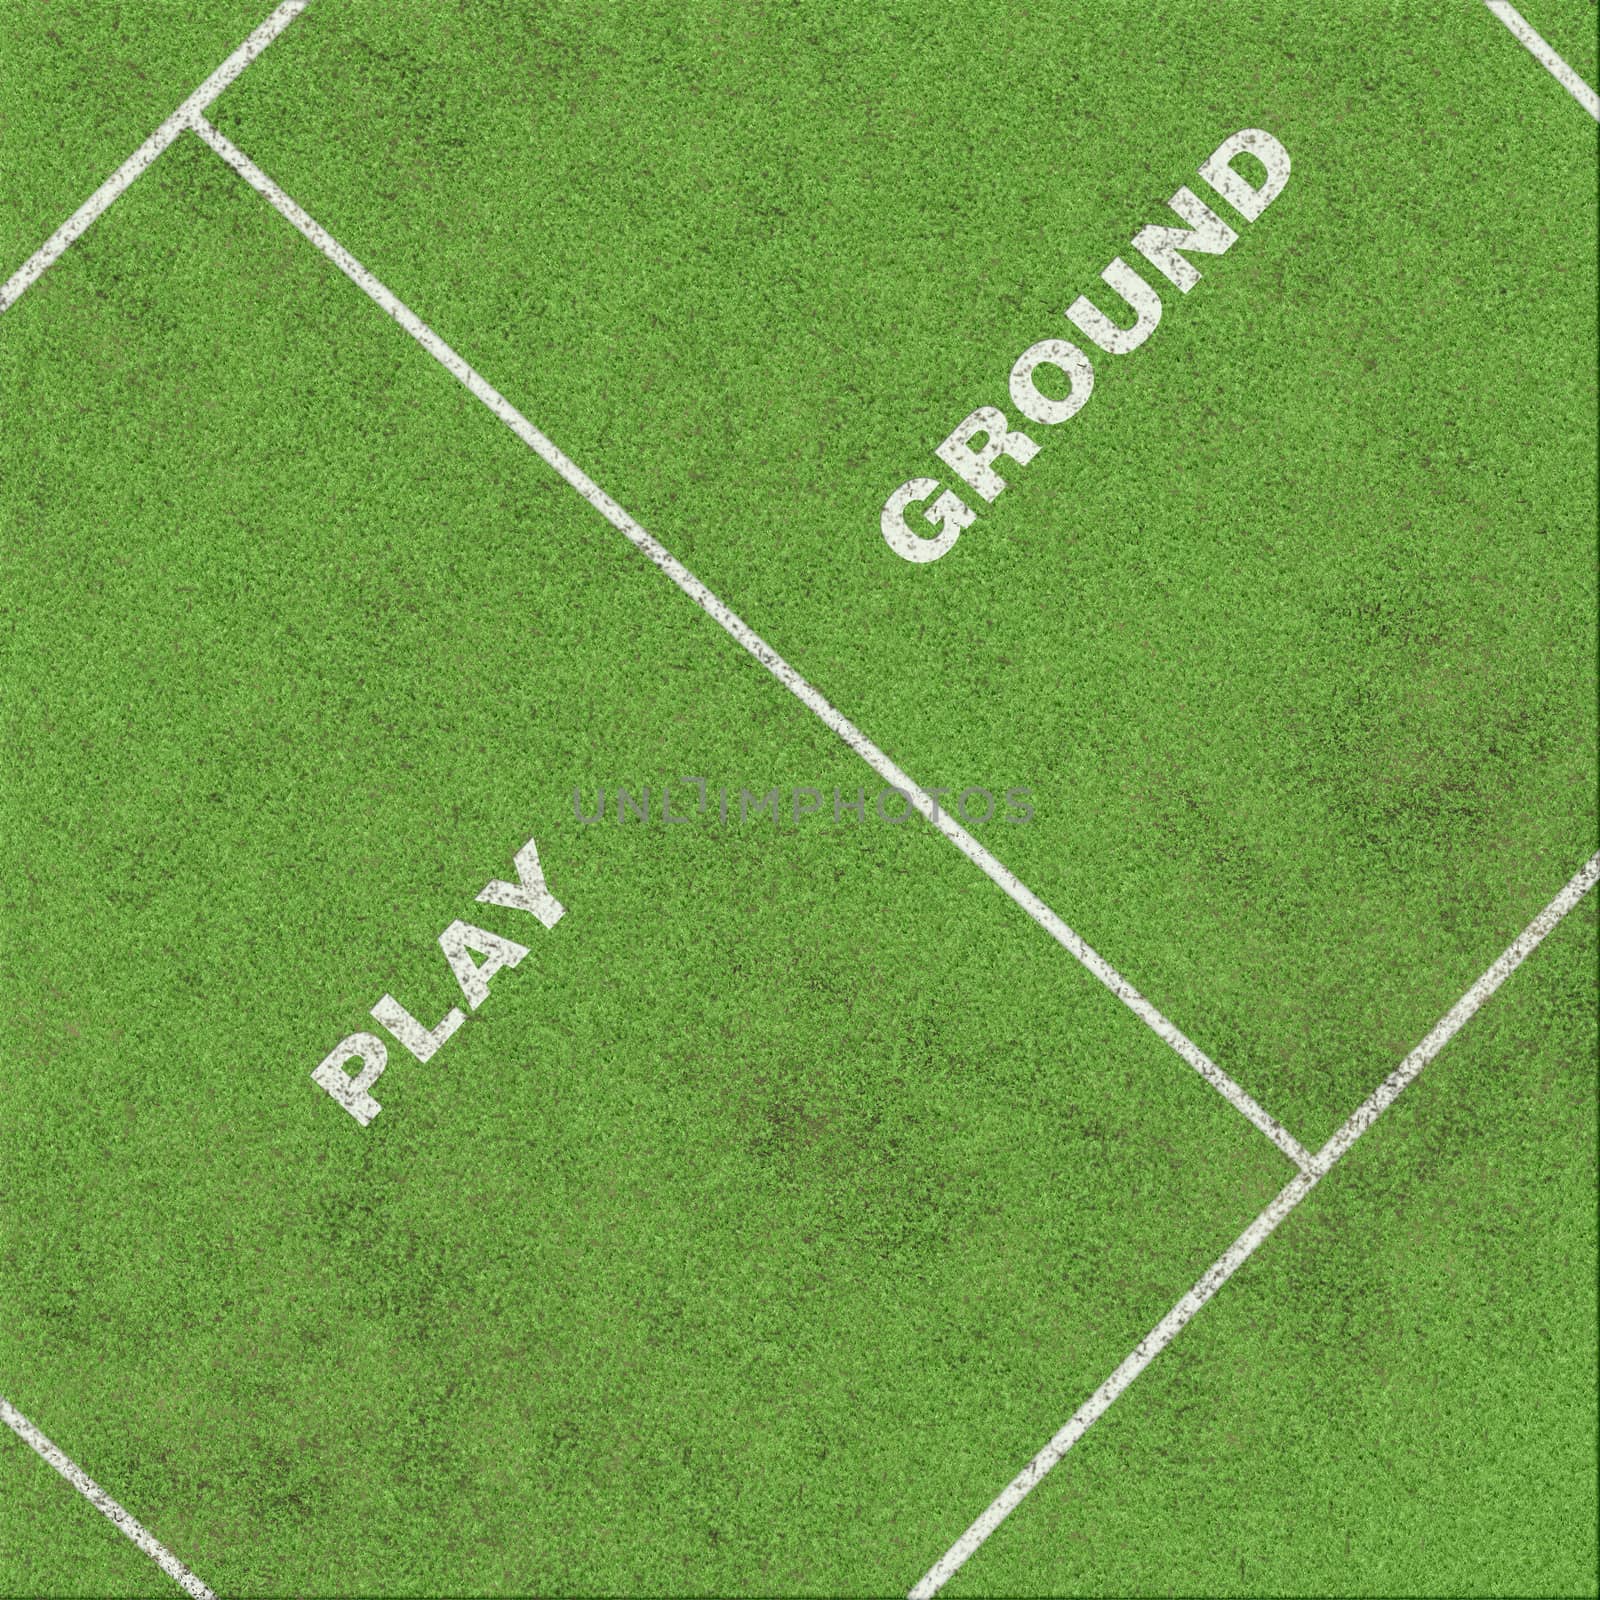 playground text on grass with area of field